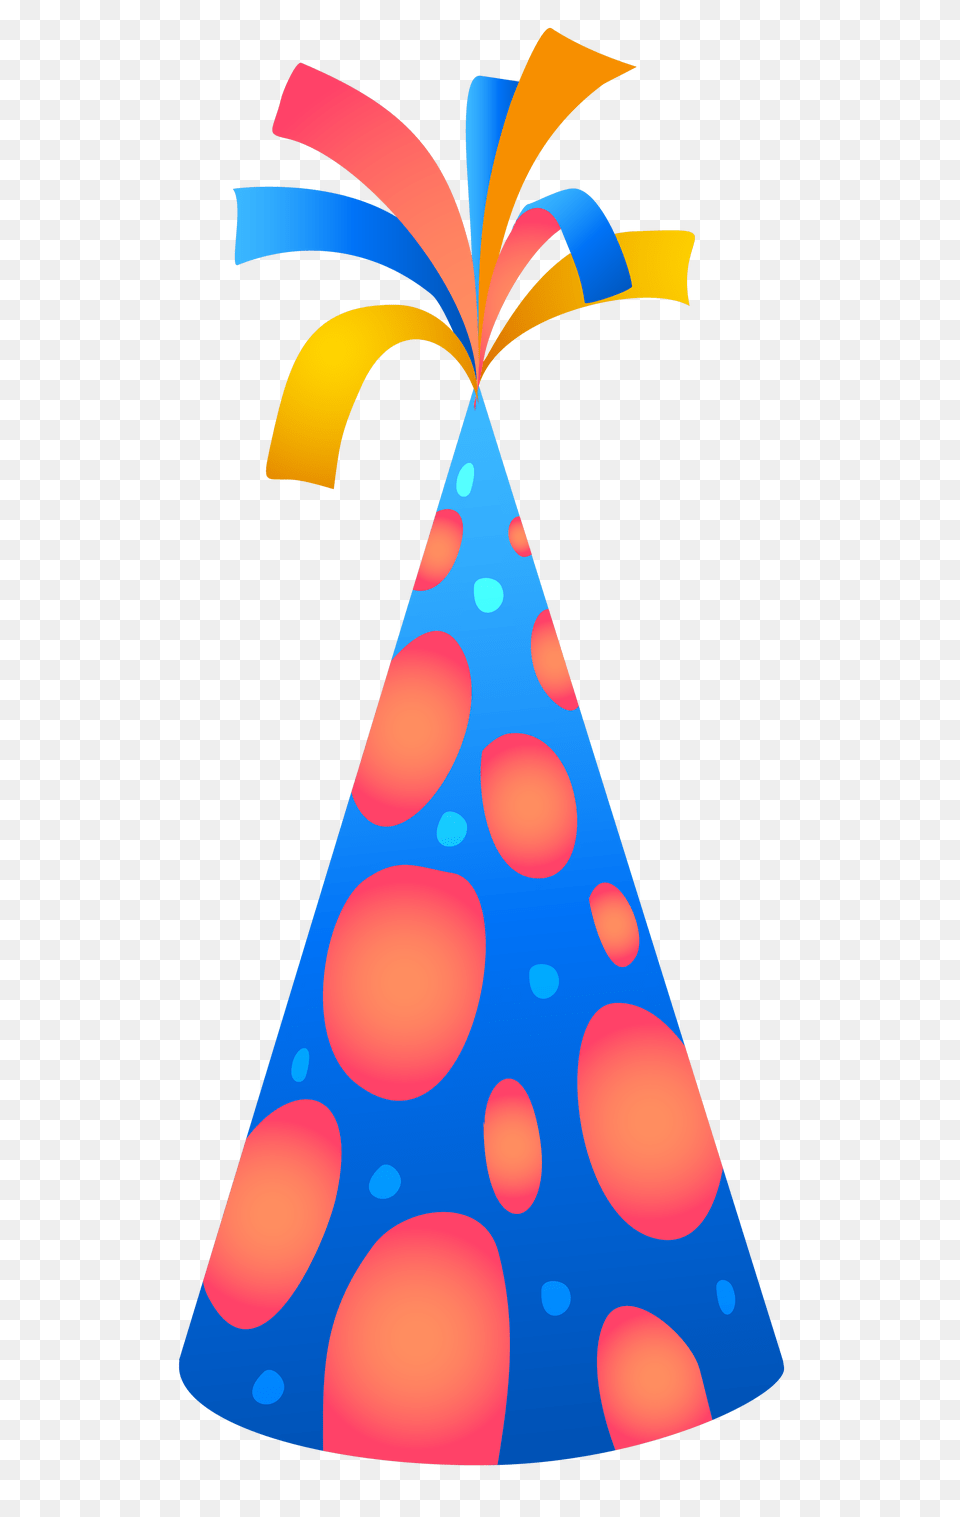 Pngpix Com Party Hat Image, Clothing, Dynamite, Party Hat, Weapon Free Png Download